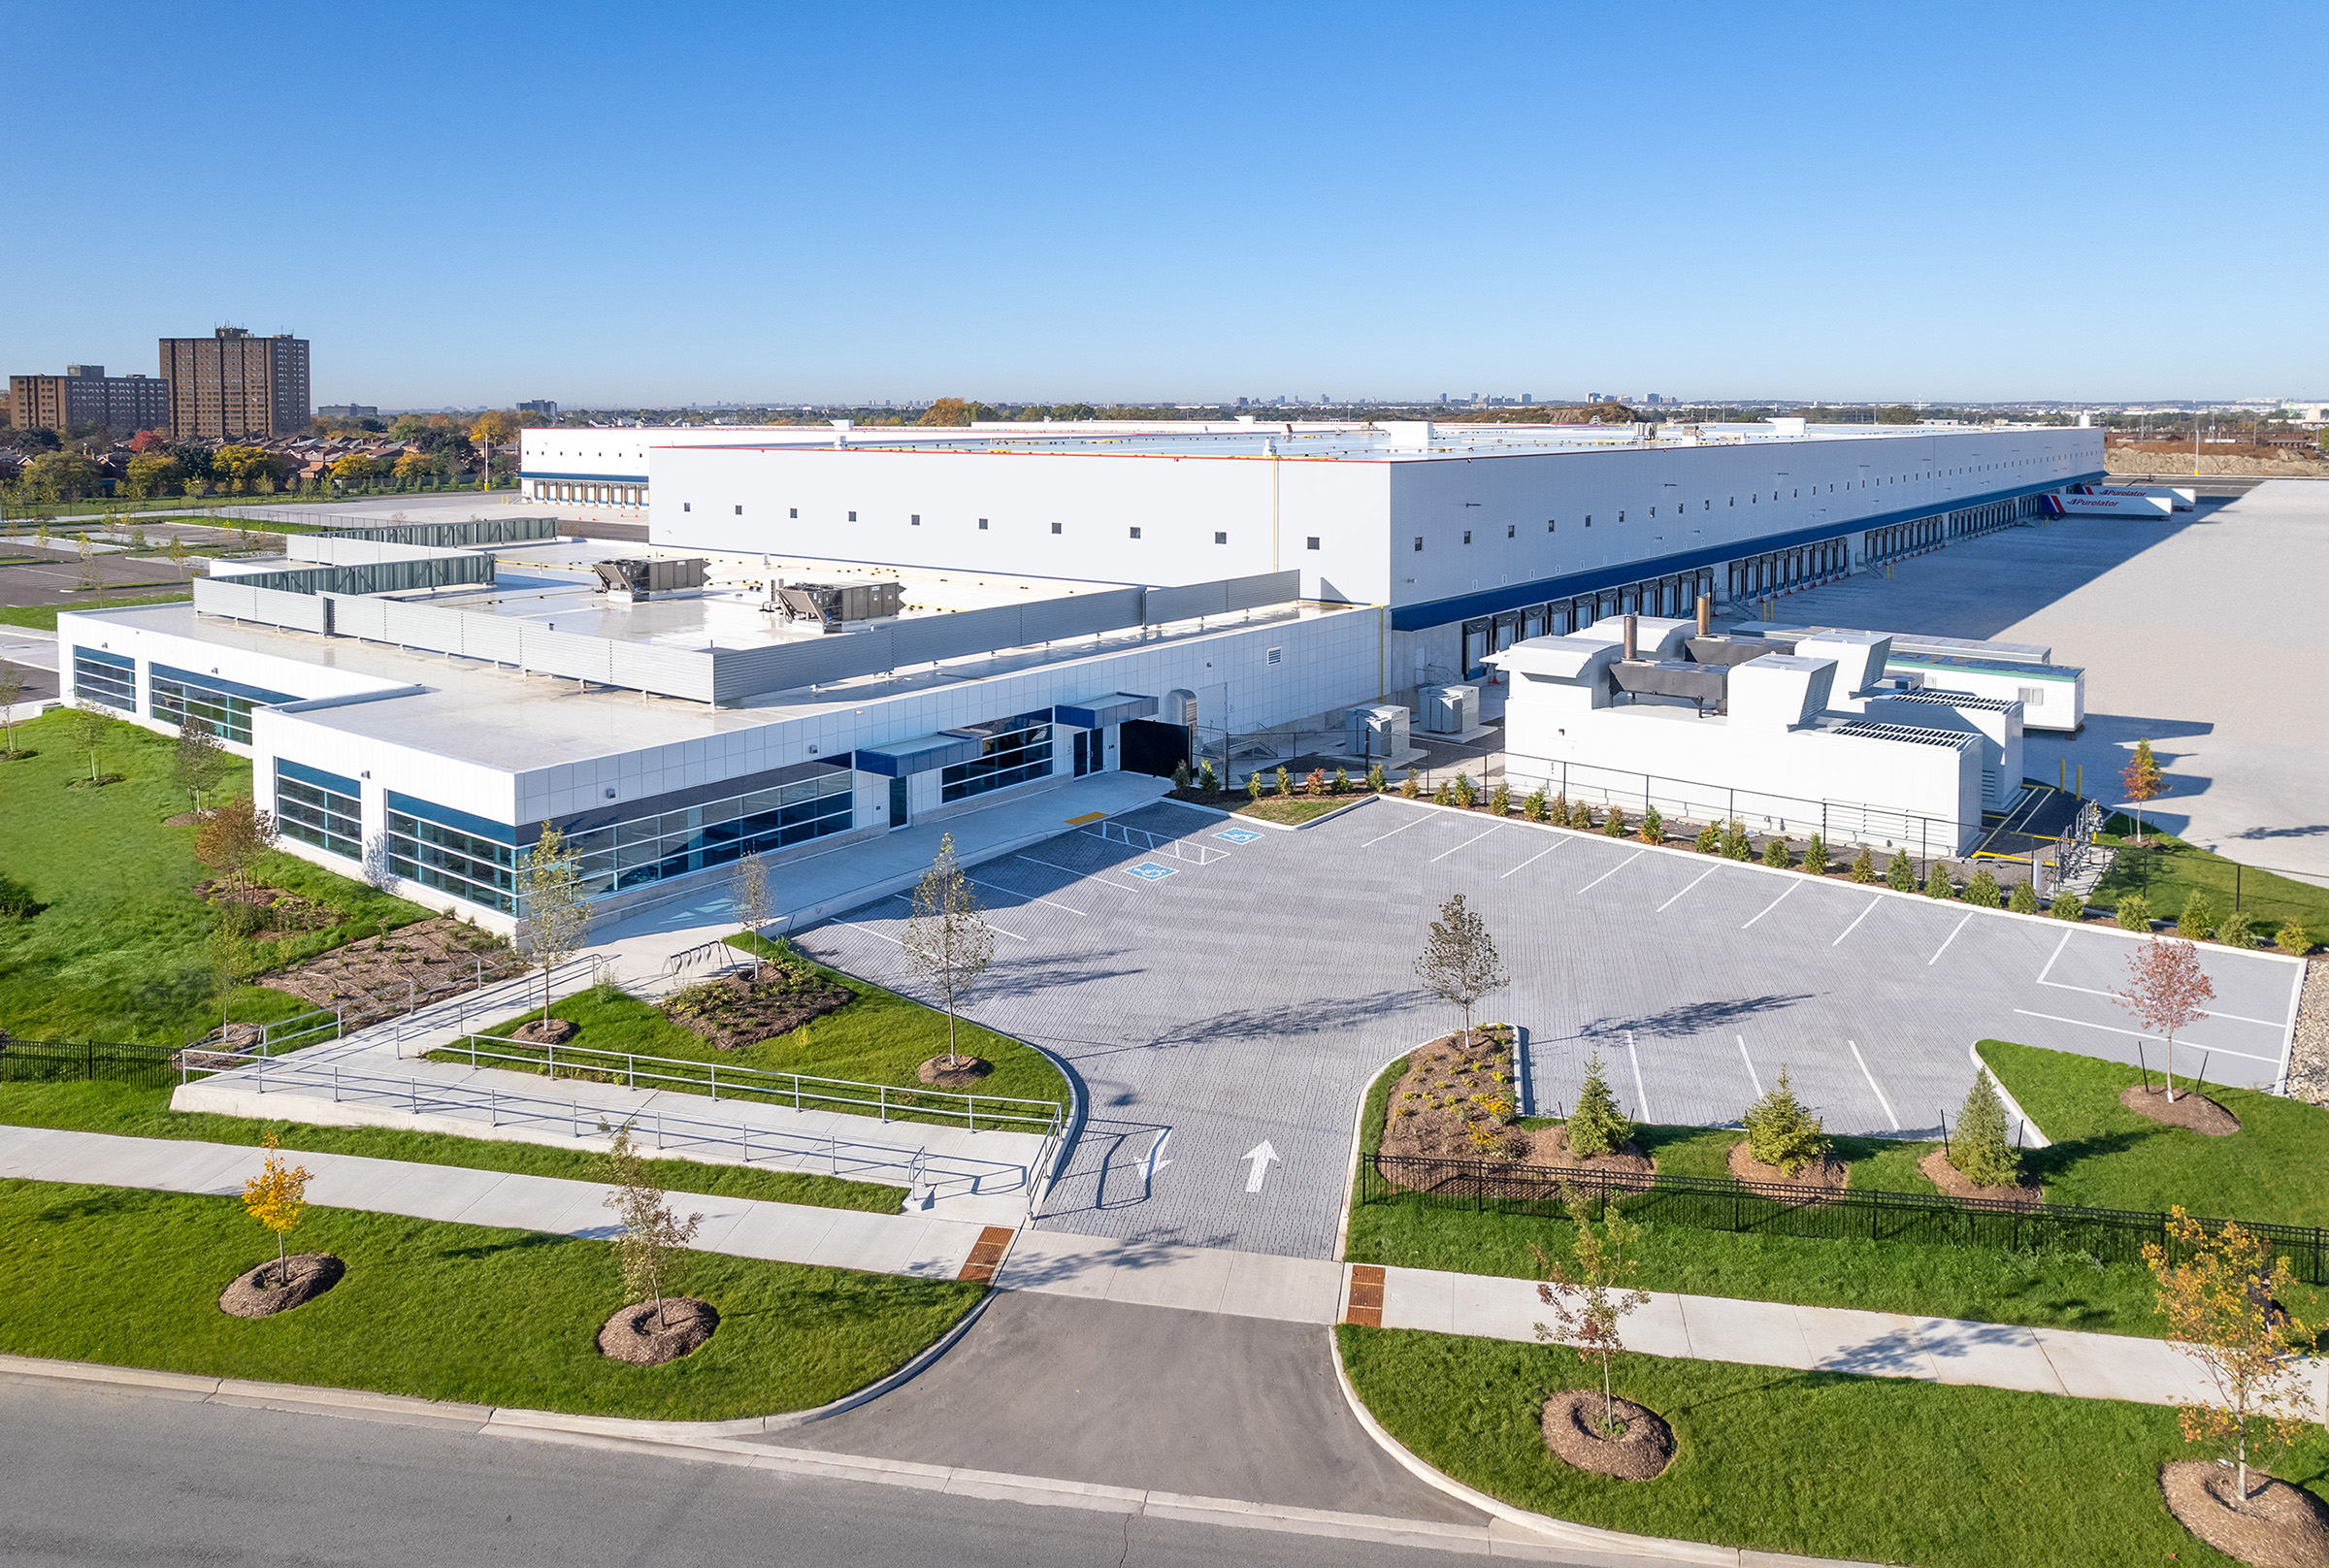 Purolator’s National Hub sortation facility stretches over 62 acres, roughly the size of 31 CFL football fields. The site is strategically located near Highways 401, 407, 427 and 27.